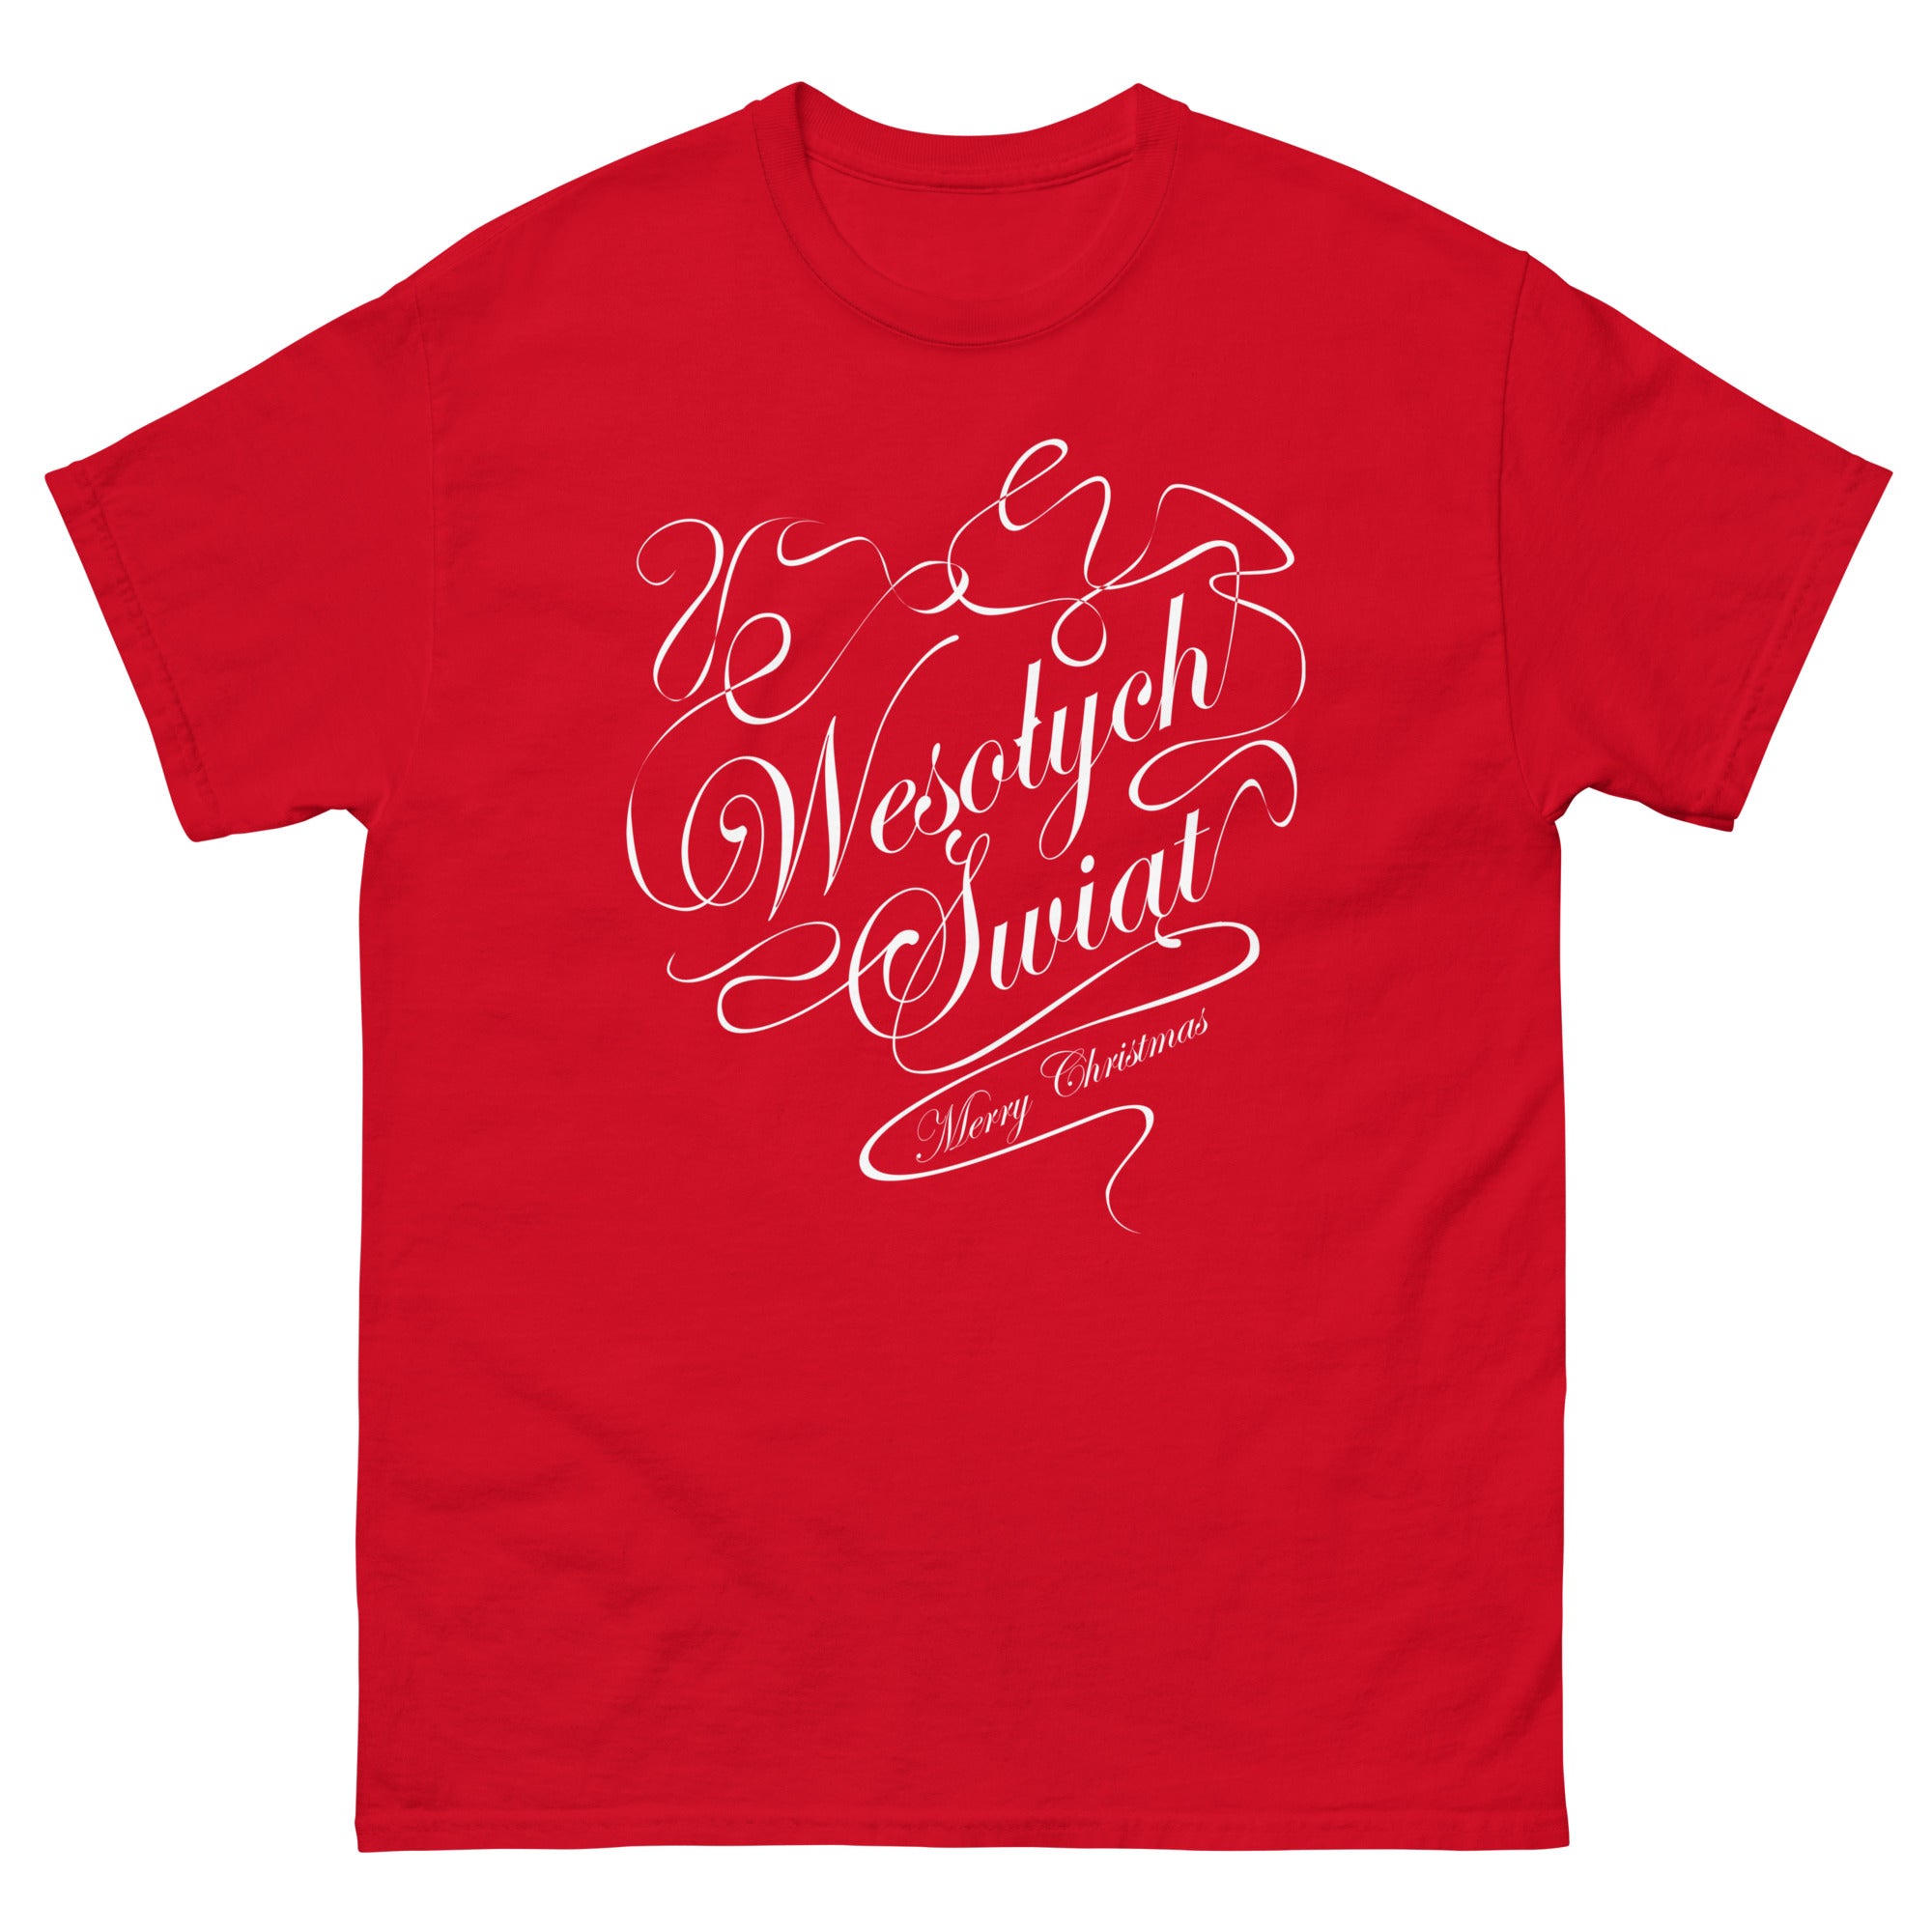 Wesolych Swiat - Merry Christmas Men's classic tee